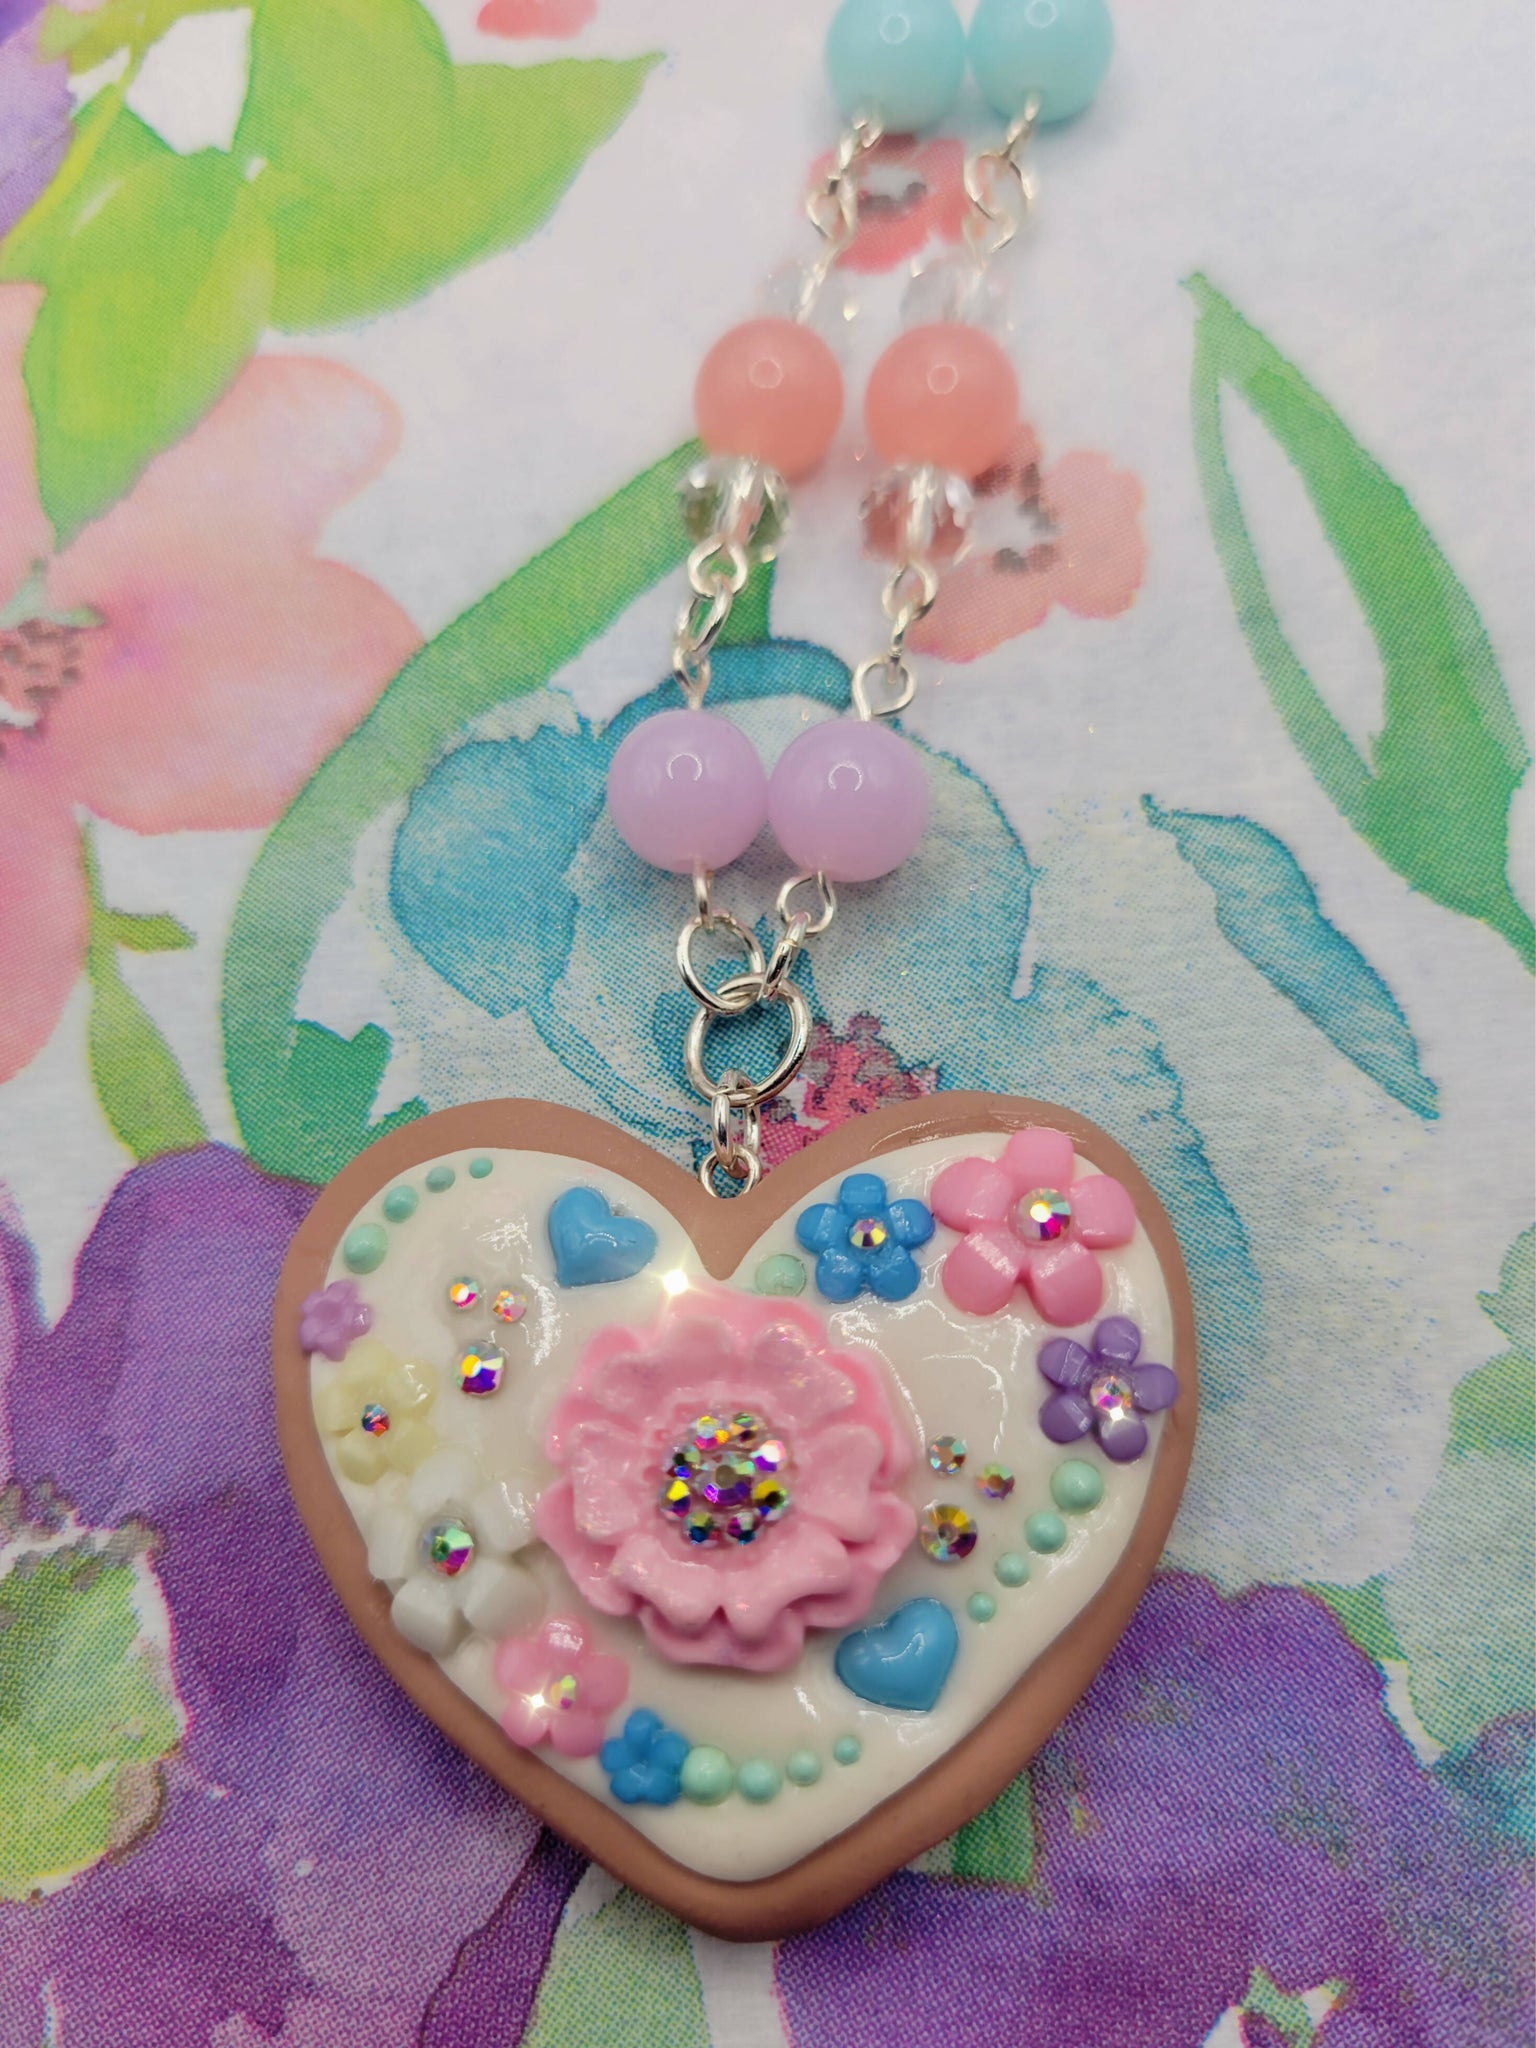 Icing Cookie Floral Necklace